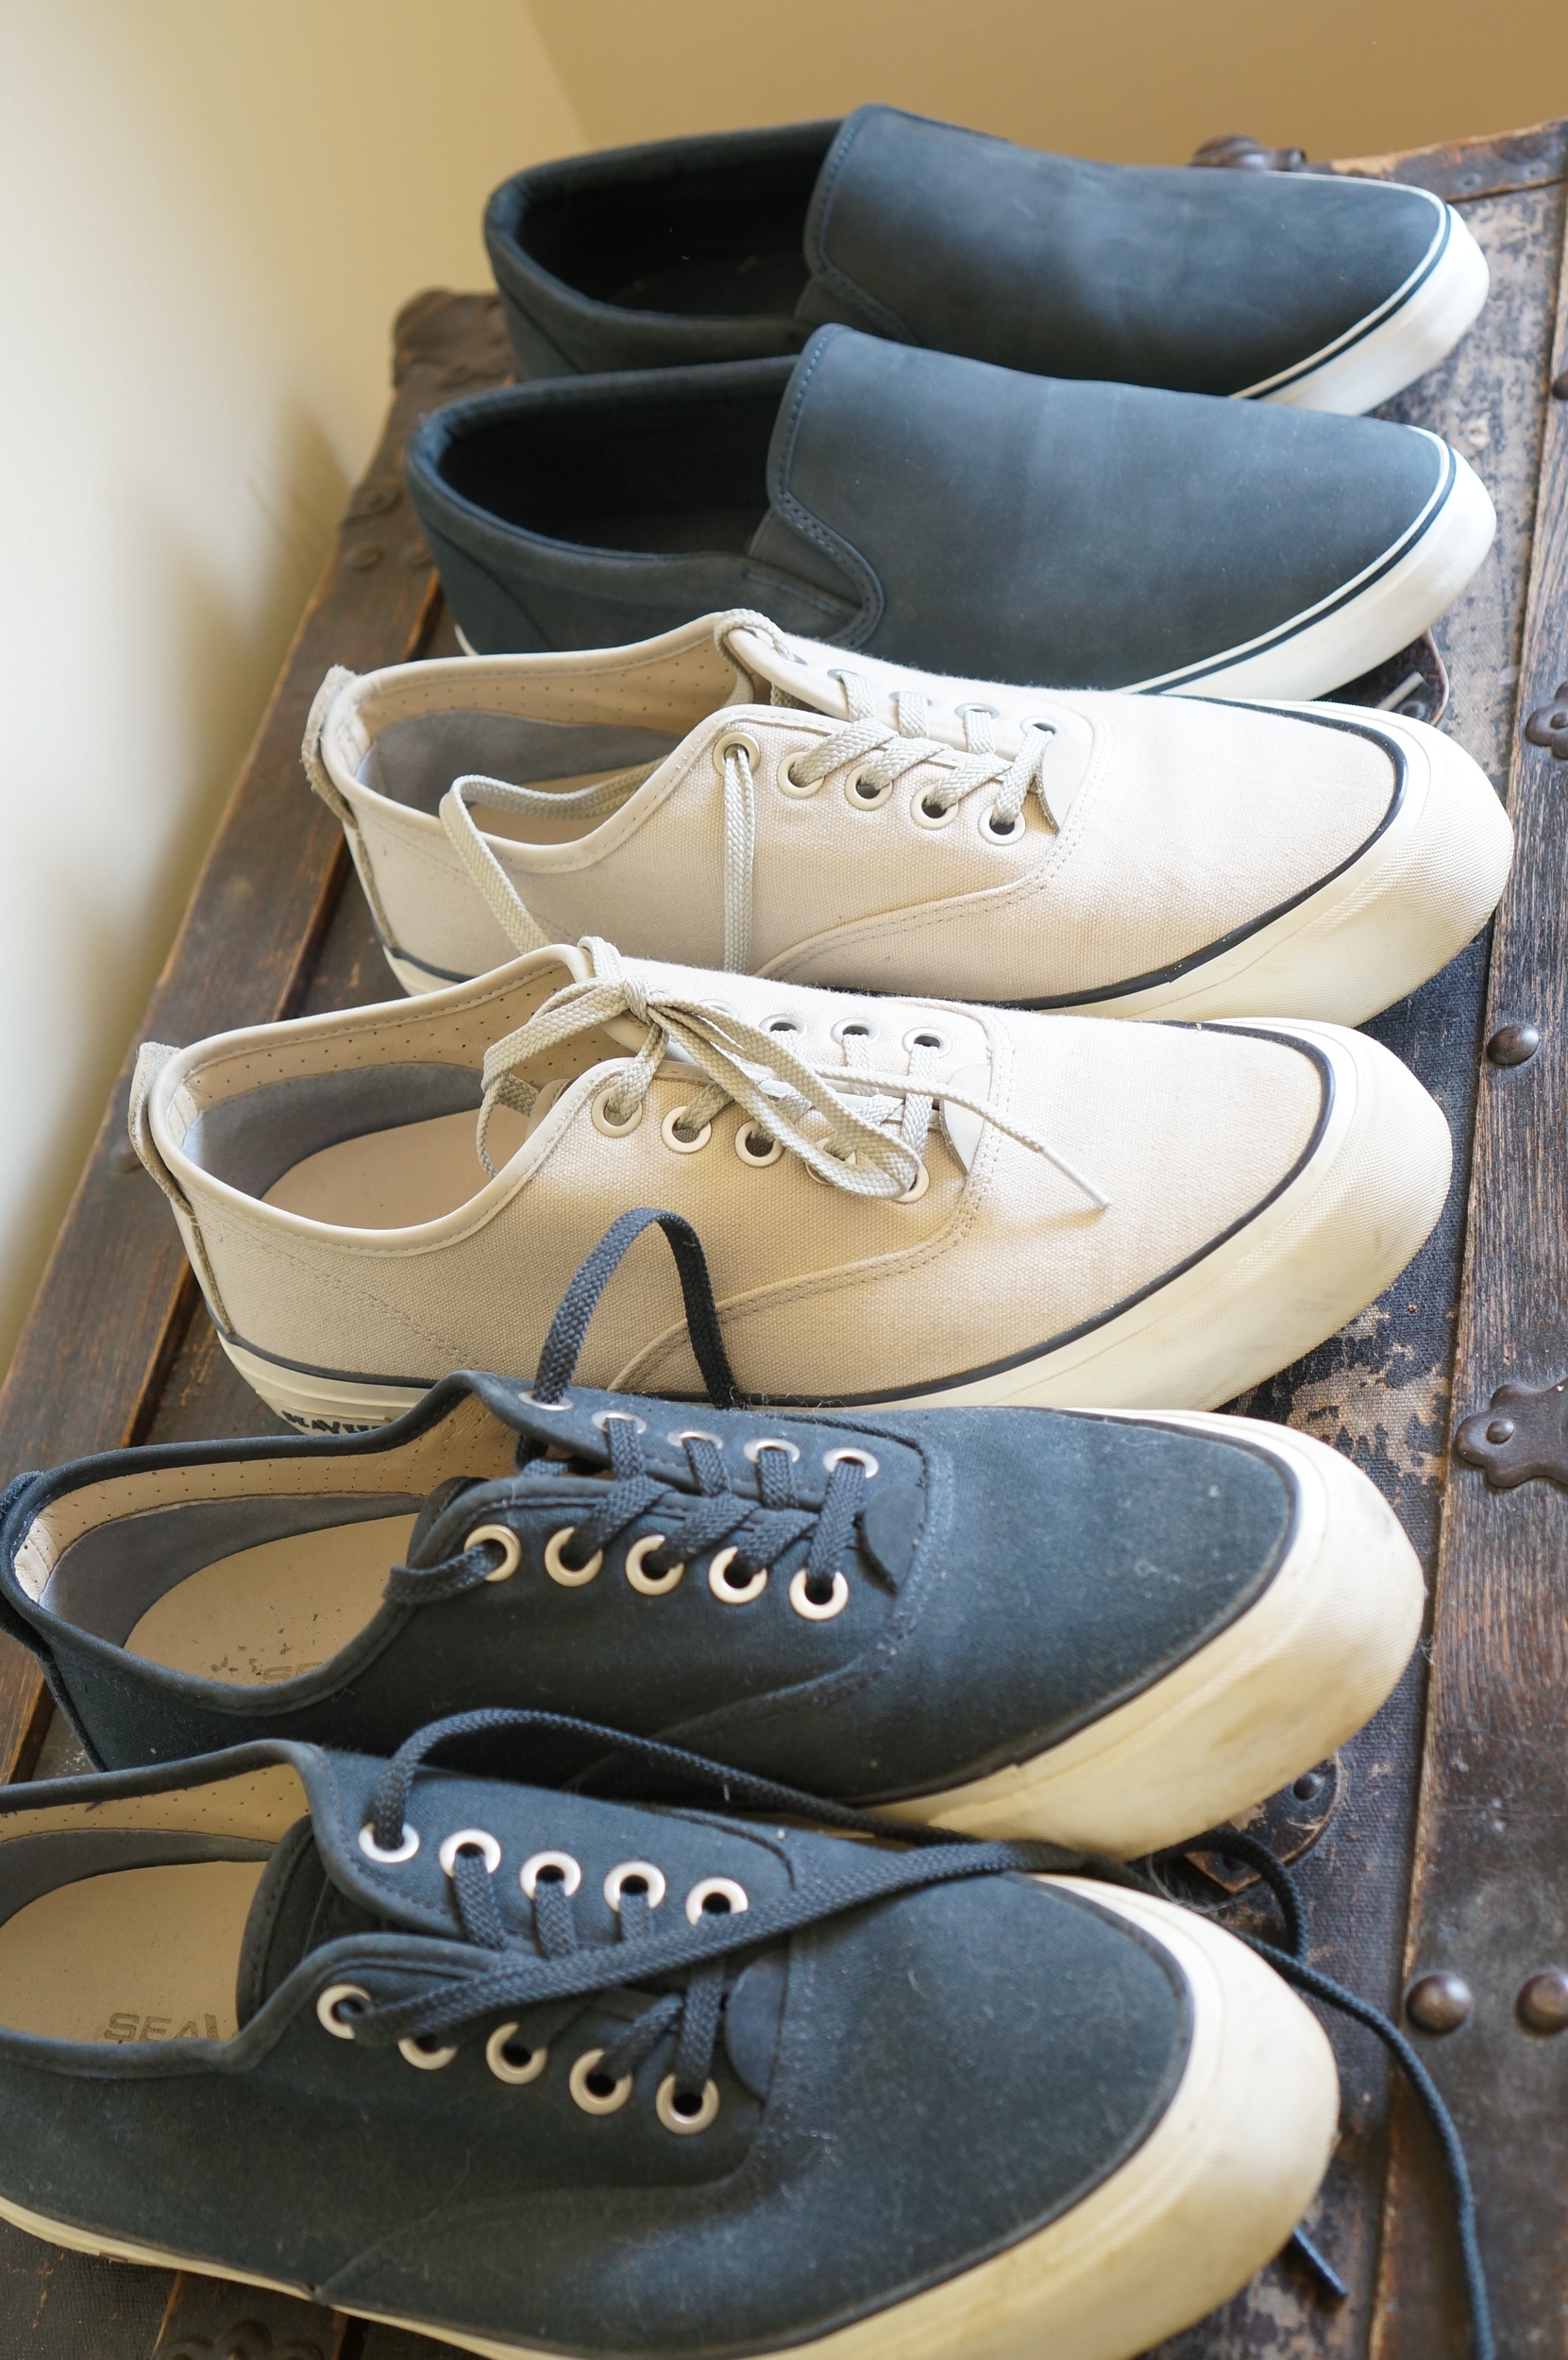 Preppy Sneakers For Guys | vlr.eng.br